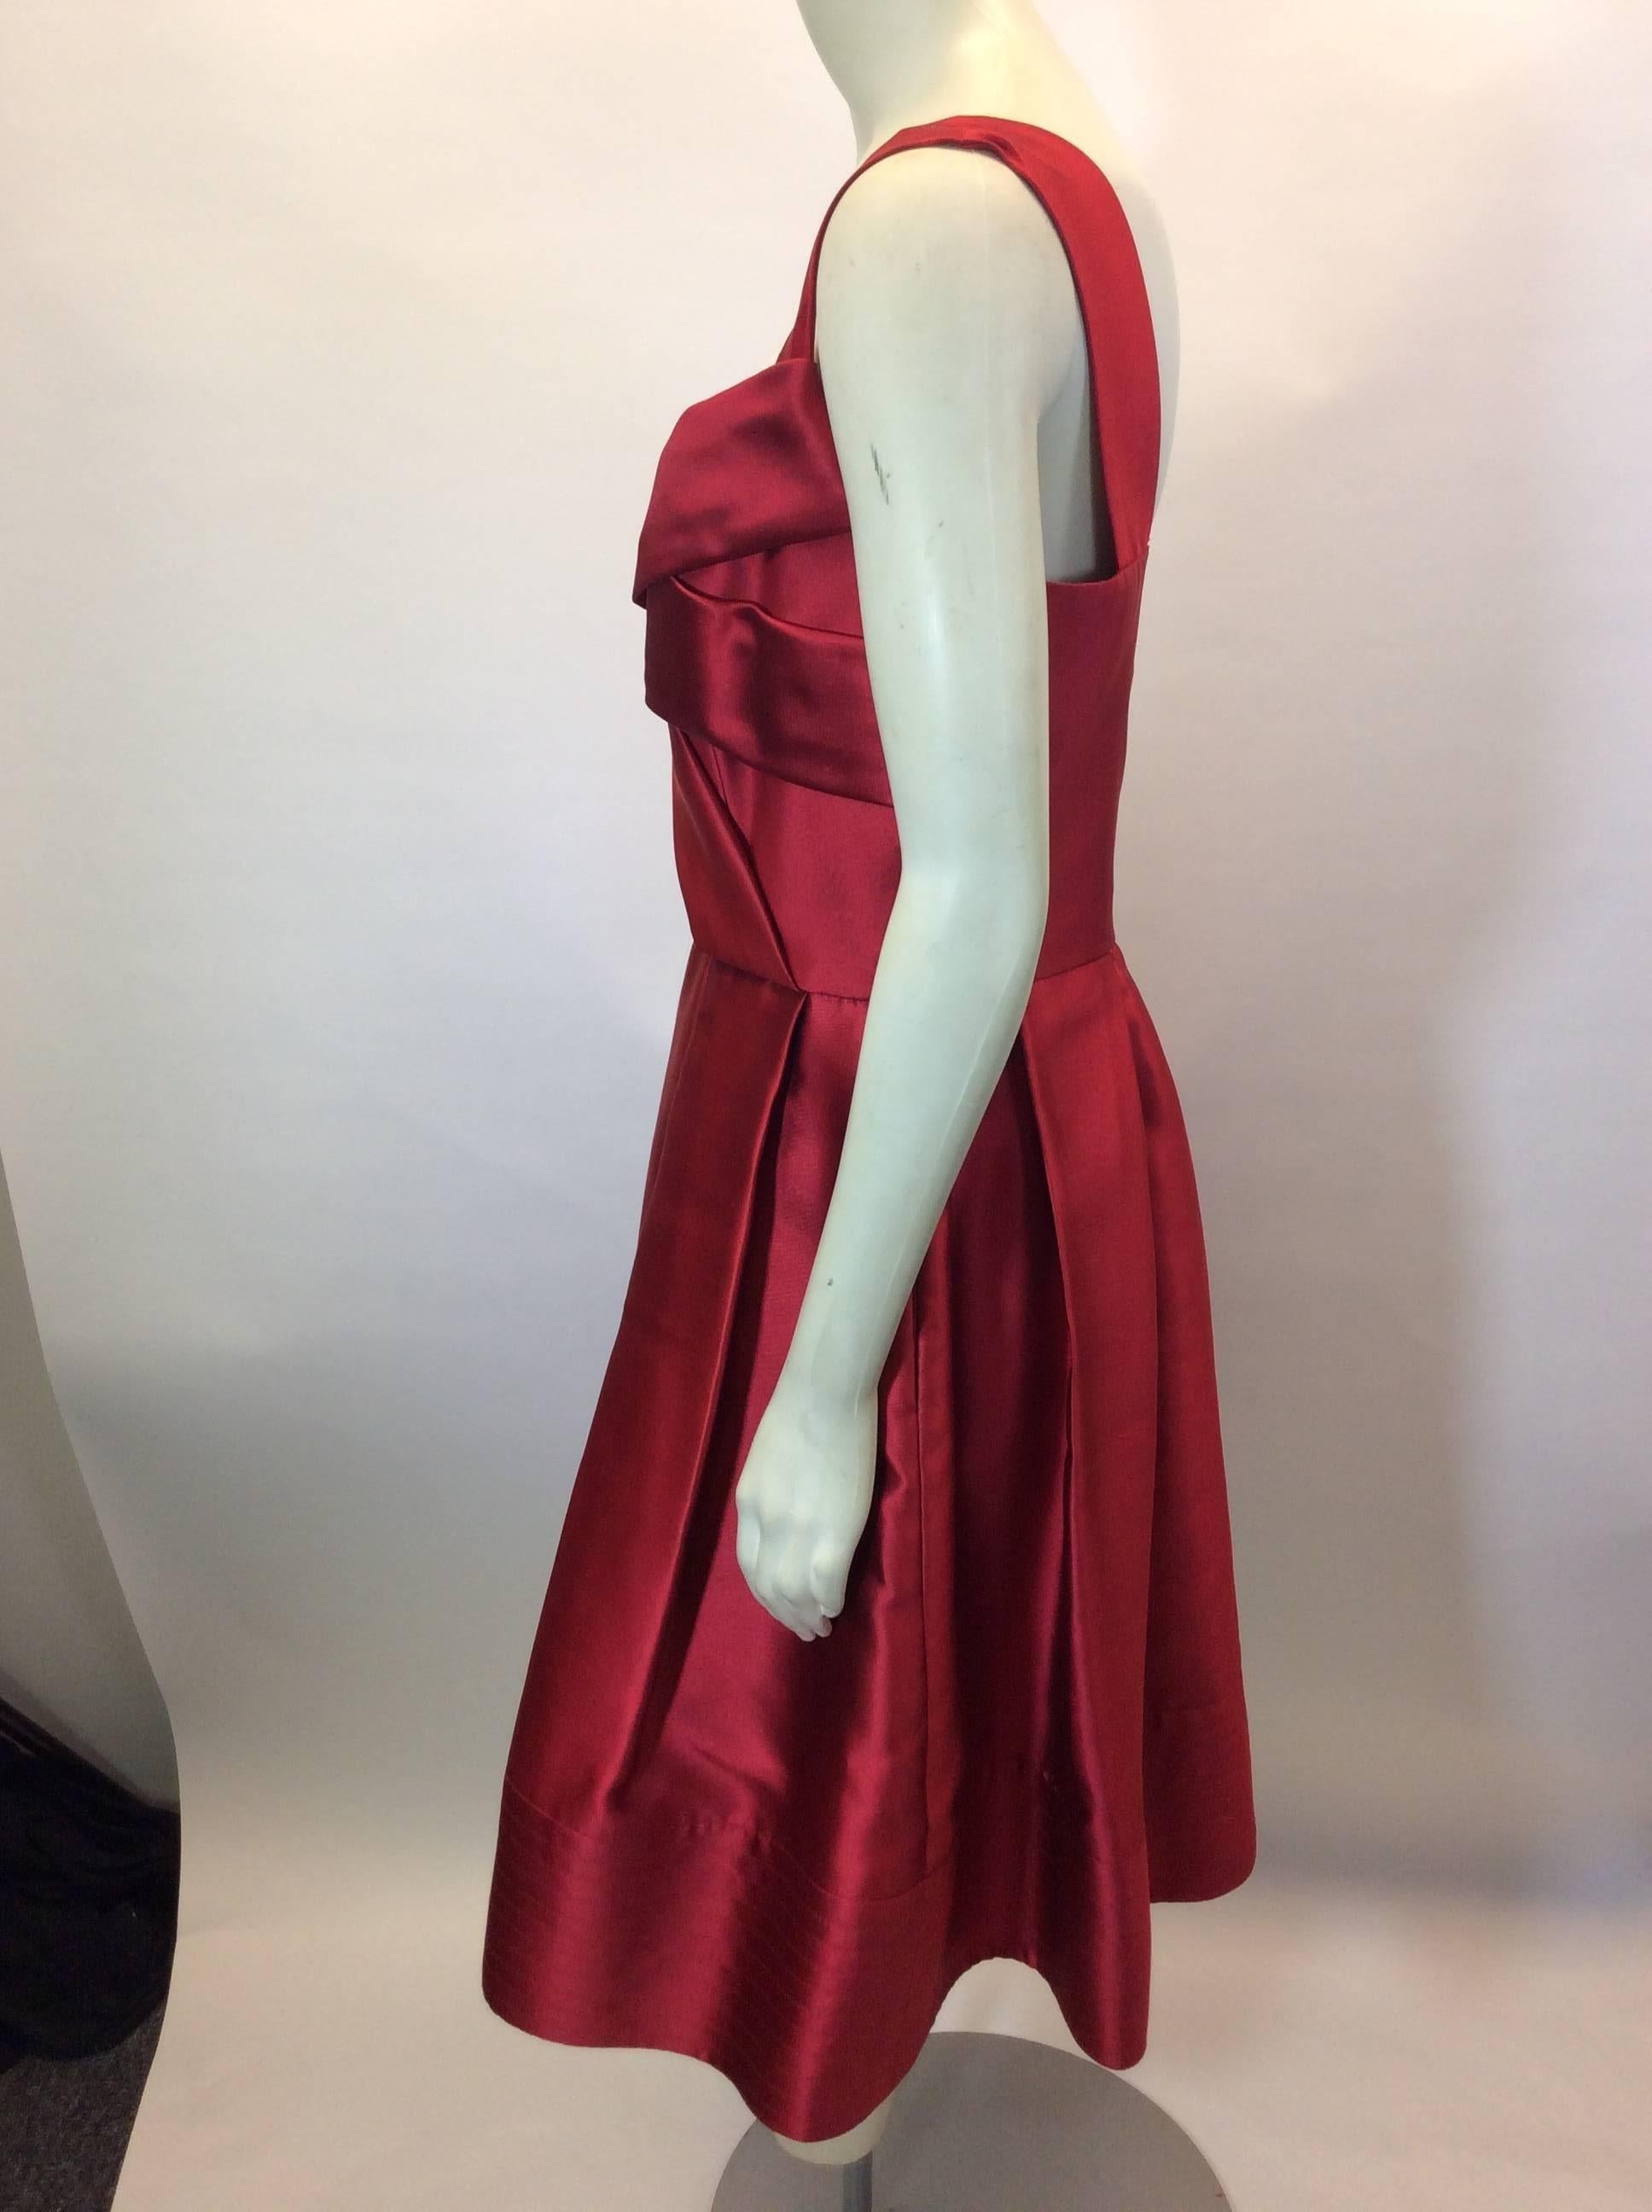 Oscar De La Renta Red Satin Bow Dress with Pleated Skirt In Excellent Condition For Sale In Narberth, PA